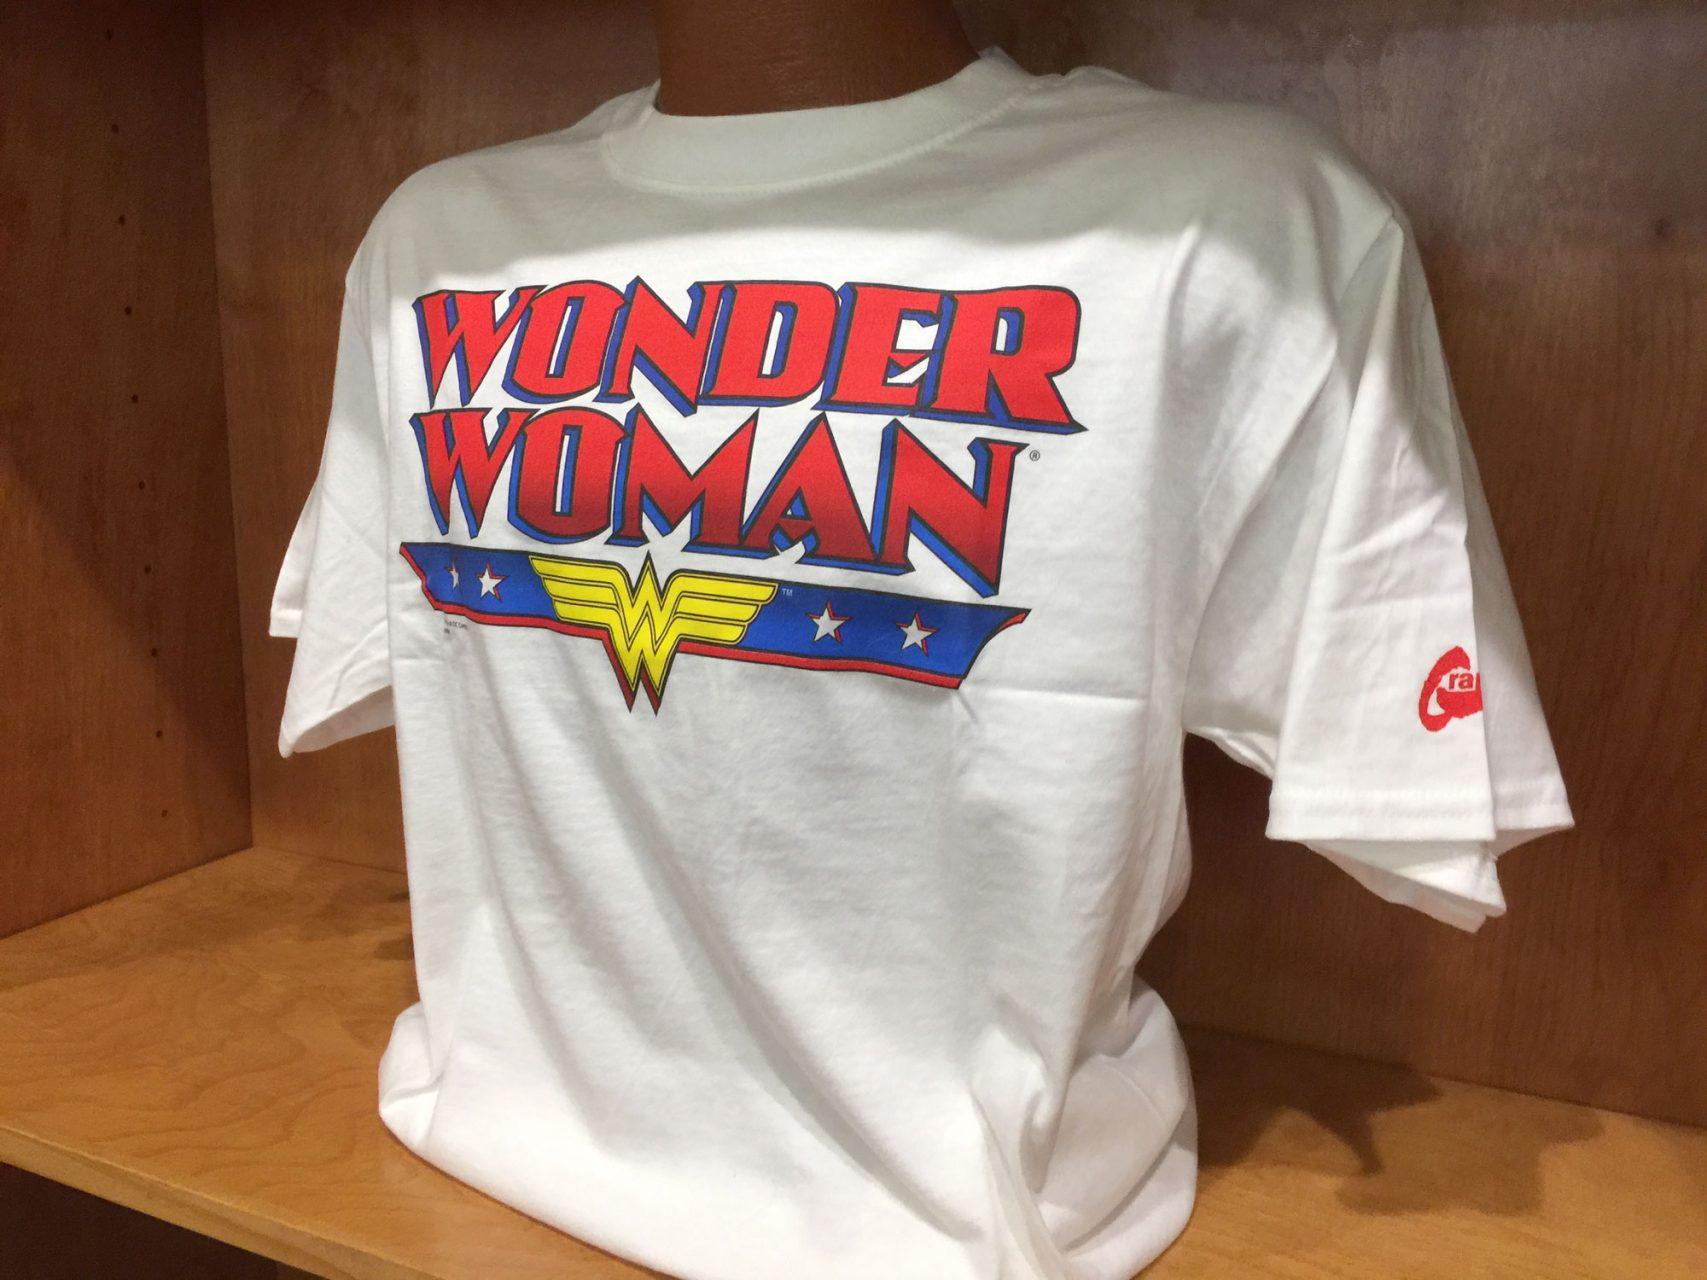 A Wonder Woman t-shirt on display in the book store. Appalachian States bookstore has a collection of superhero items for sale.   